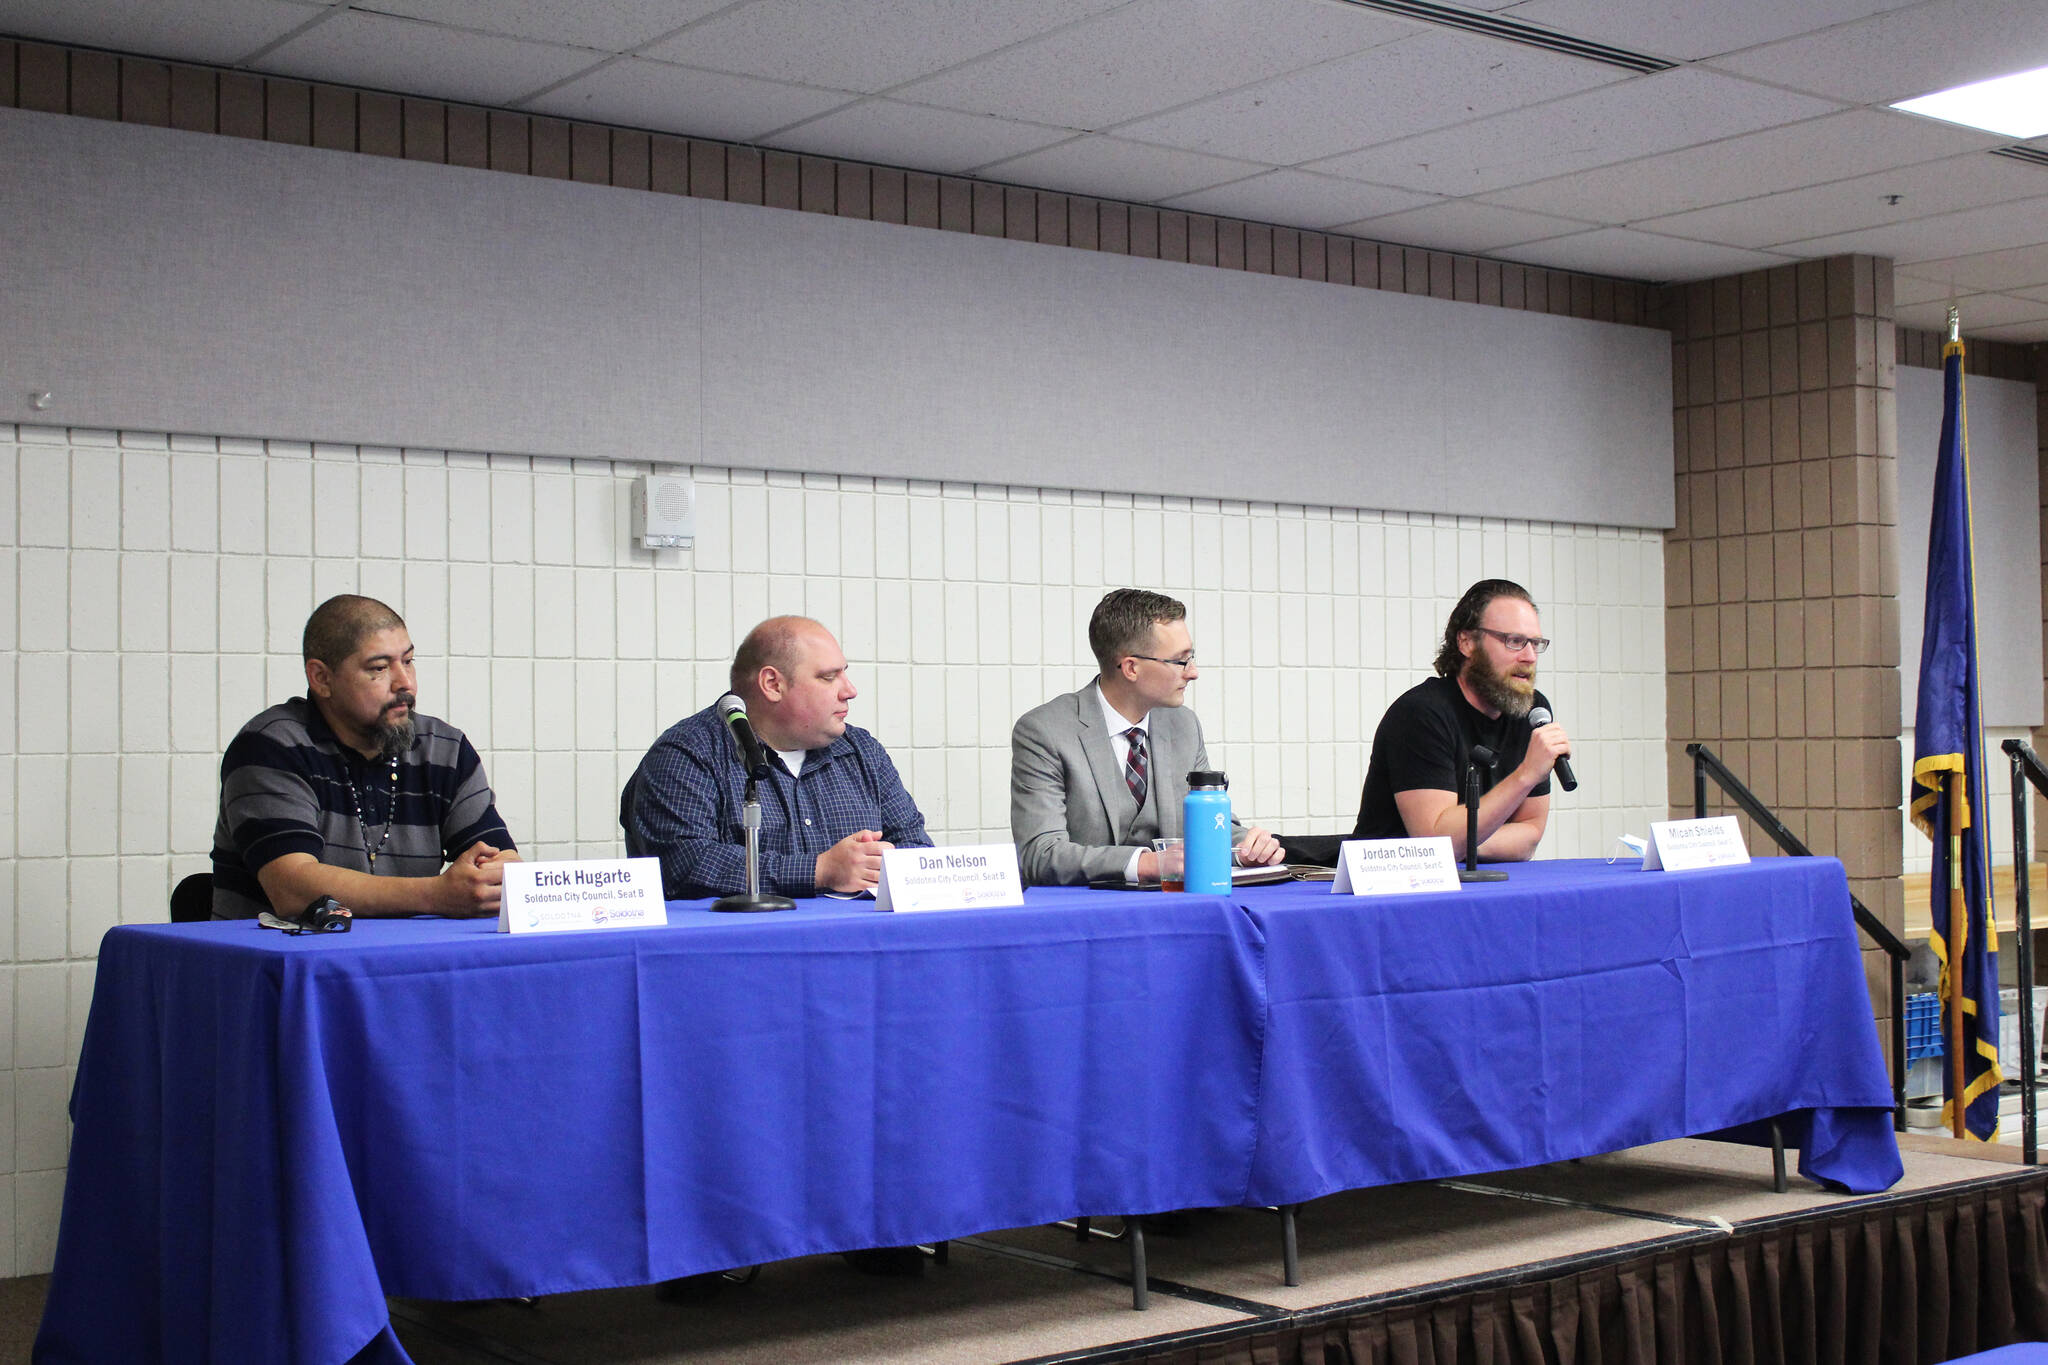 Candidates for Soldotna City Council attend a forum at the Soldotna Regional Sports Complex on Wednesday, Sept. 22, 2021 in Soldotna, Alaska. (Ashlyn O’Hara/Peninsula Clarion)